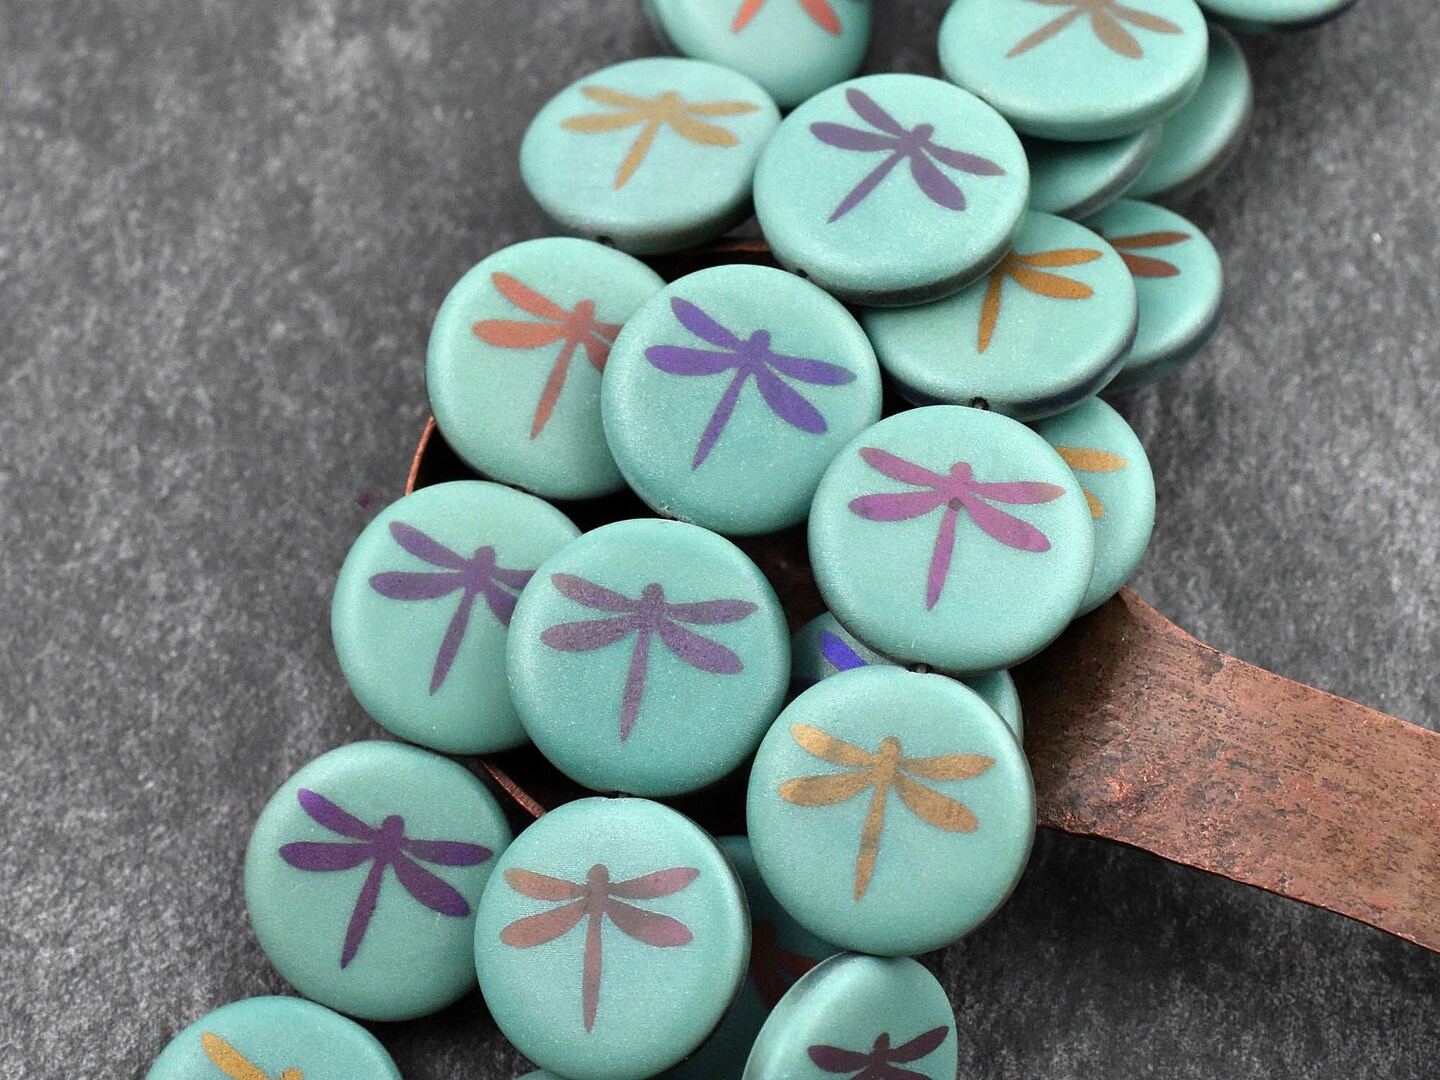 *8* 17mm Opaque Dark Turquoise Laser Tattoo Dragonfly Coin Beads